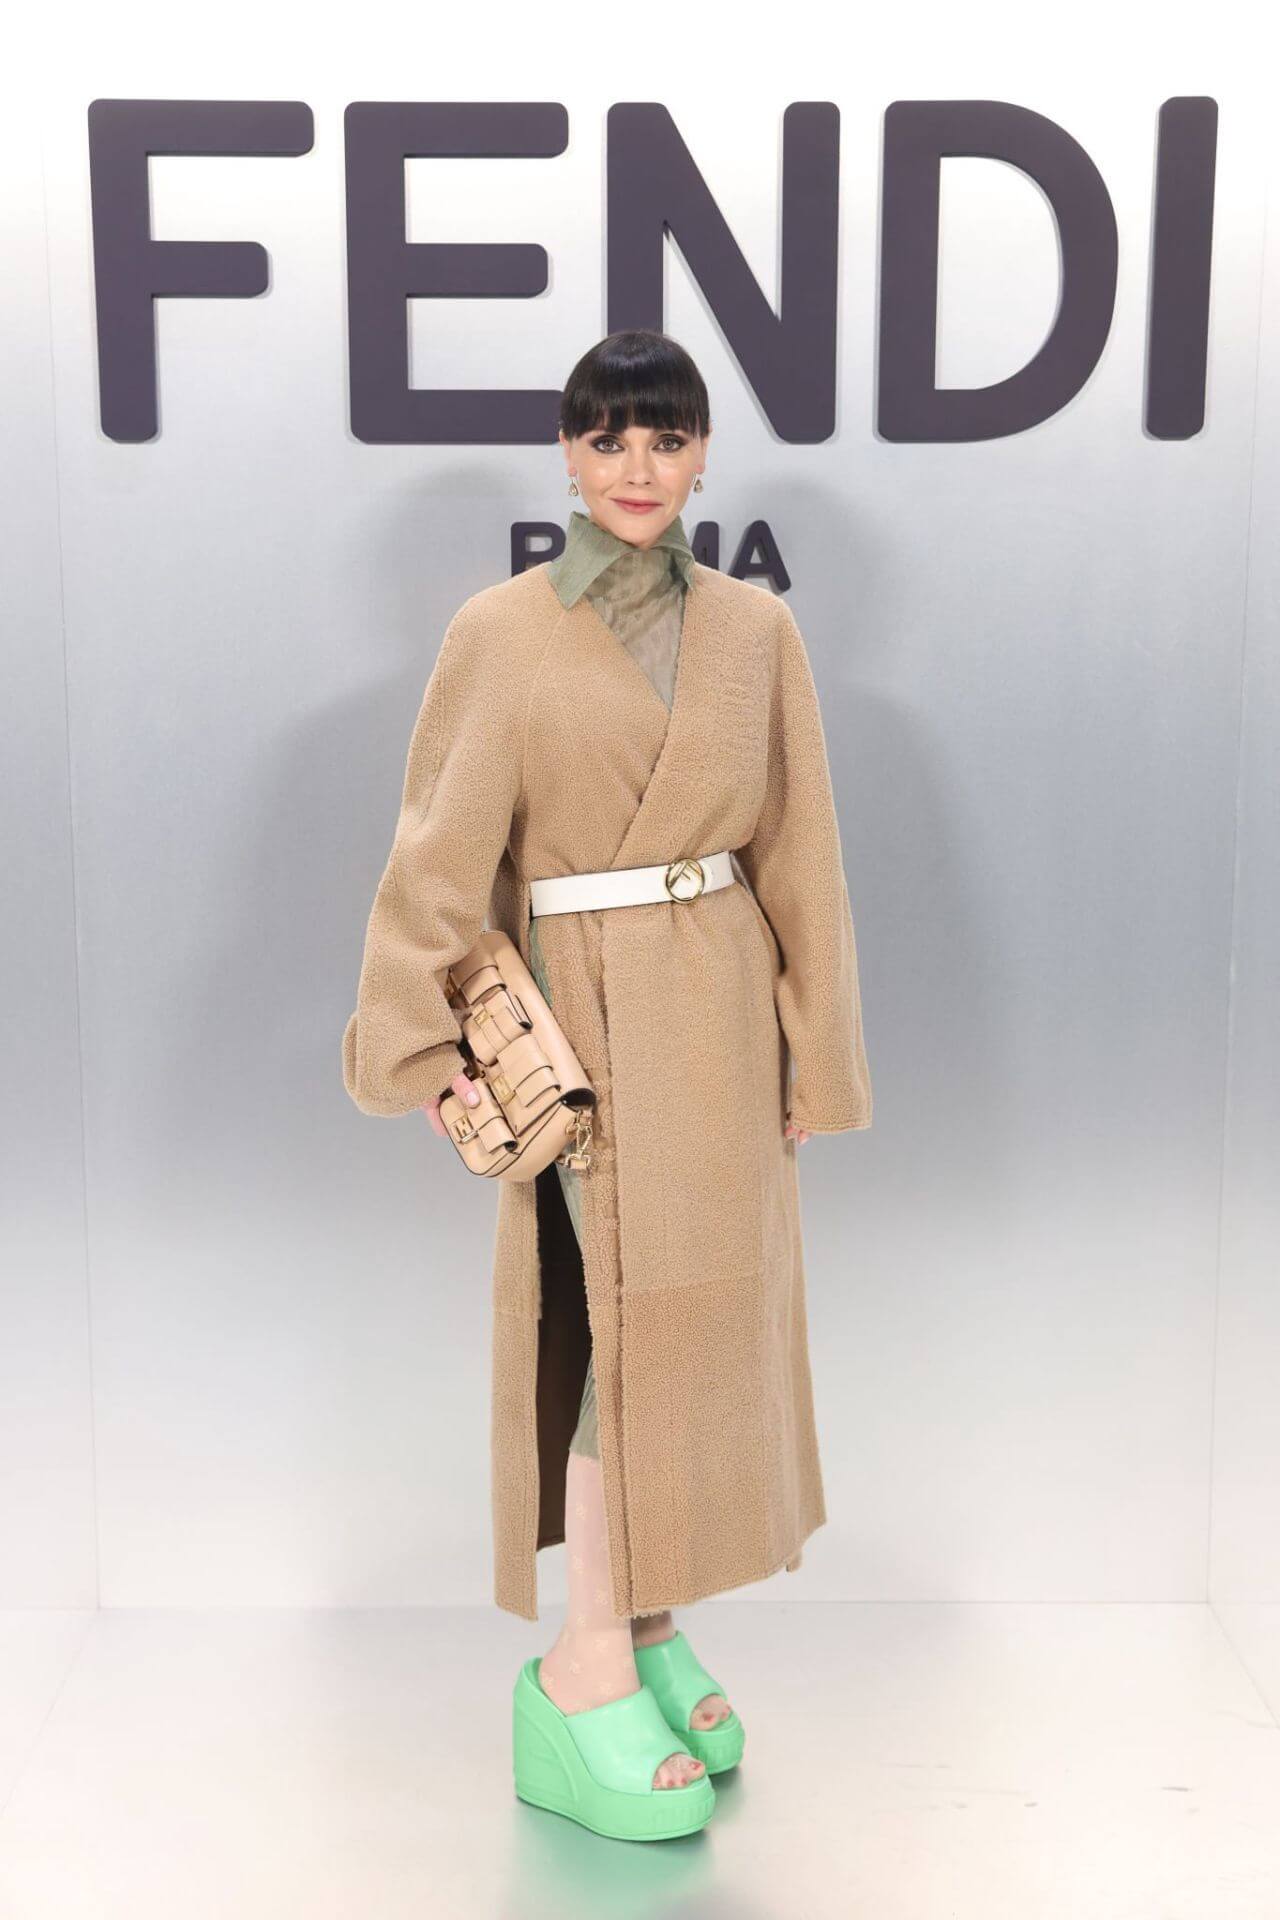 Christina Ricci In a Beige Woven Long Overcoat With a White Waist Belt  